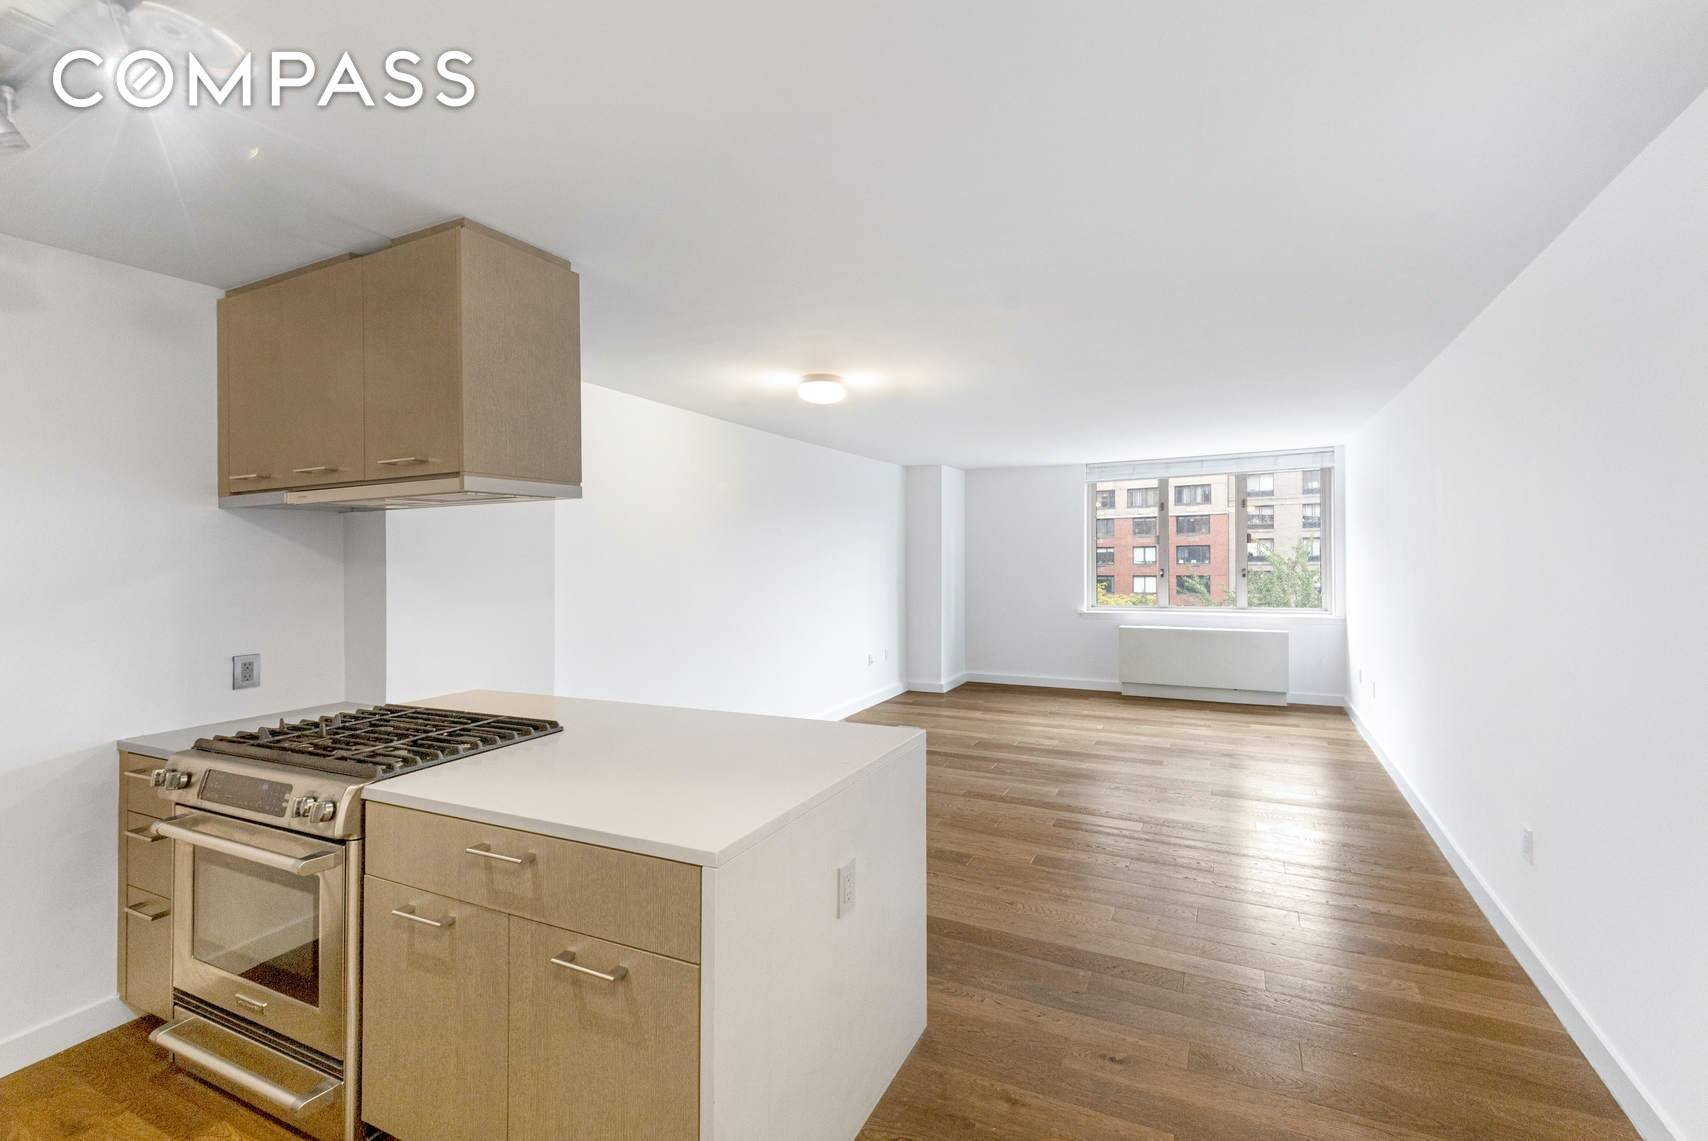 Great Apartment in the heart of Battery Park City facing South.